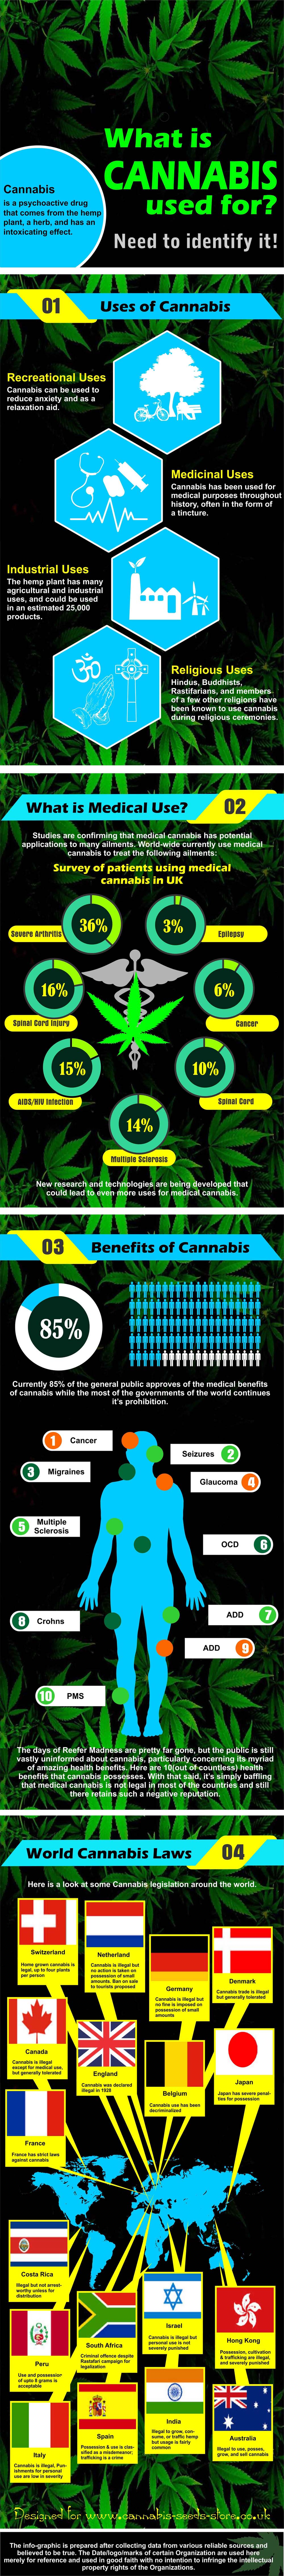 What Is Cannabis Used For?